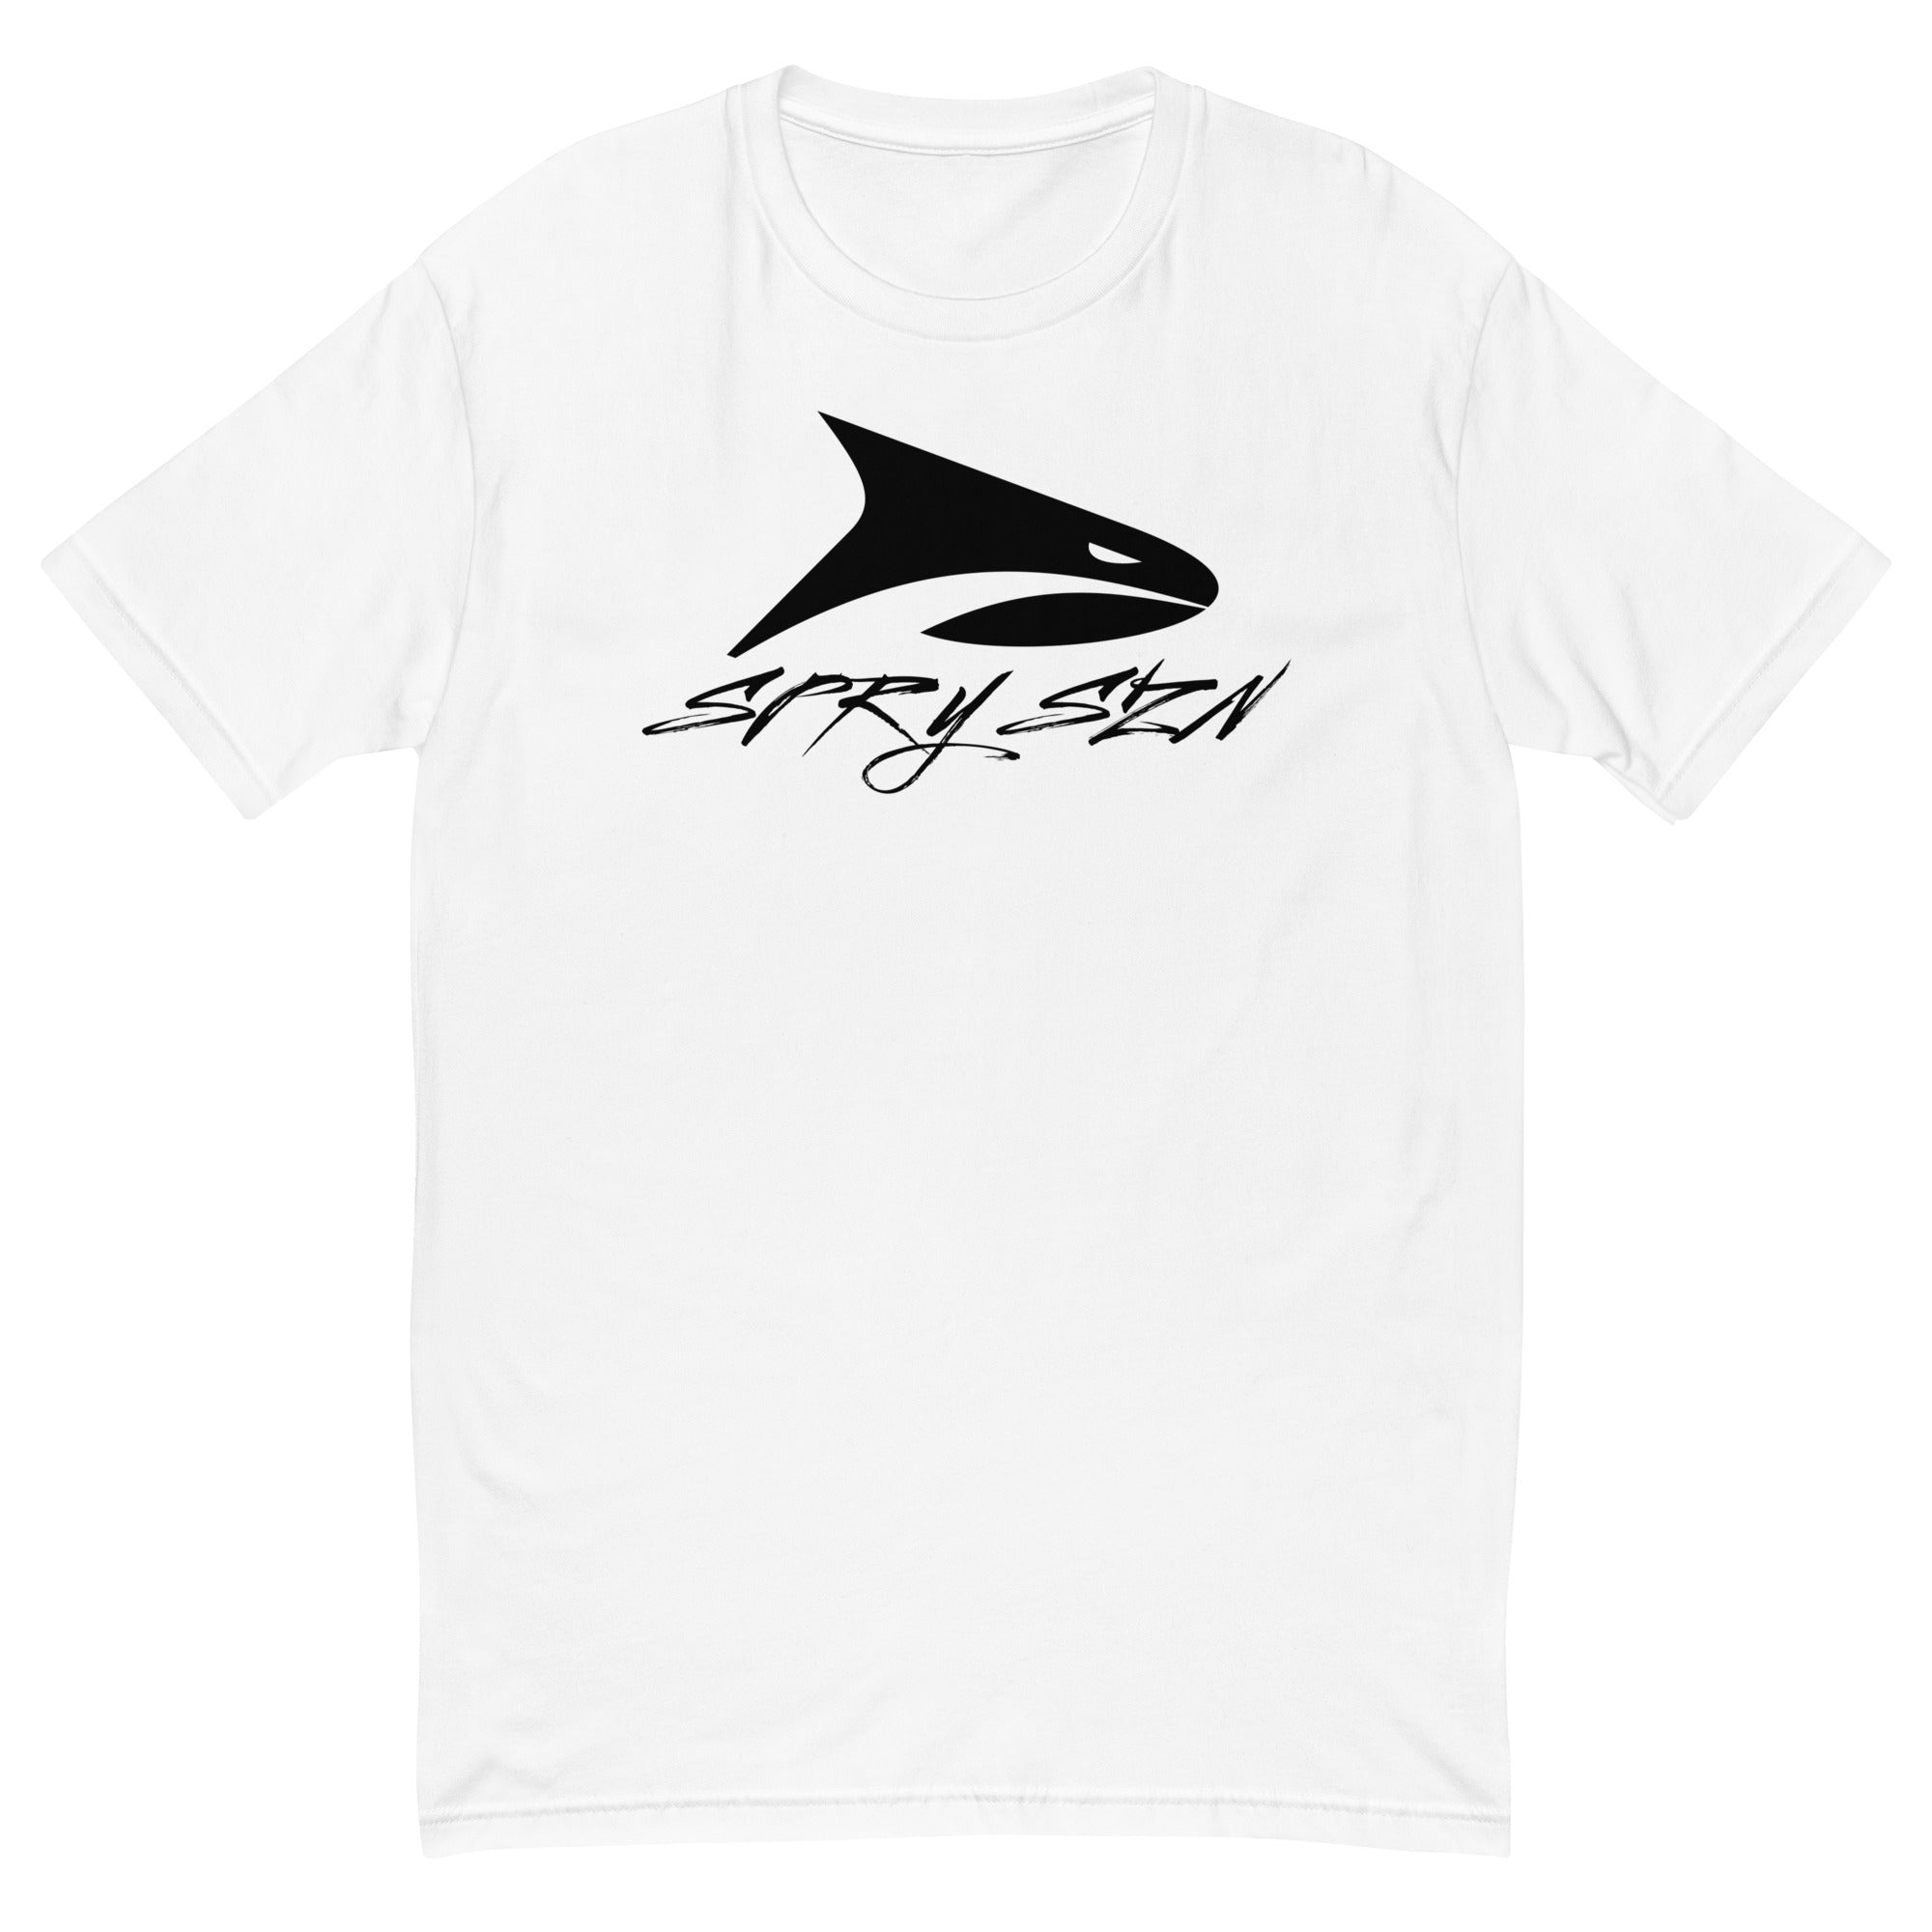 SPRY SZN Black Shark Fitted T-Shirt